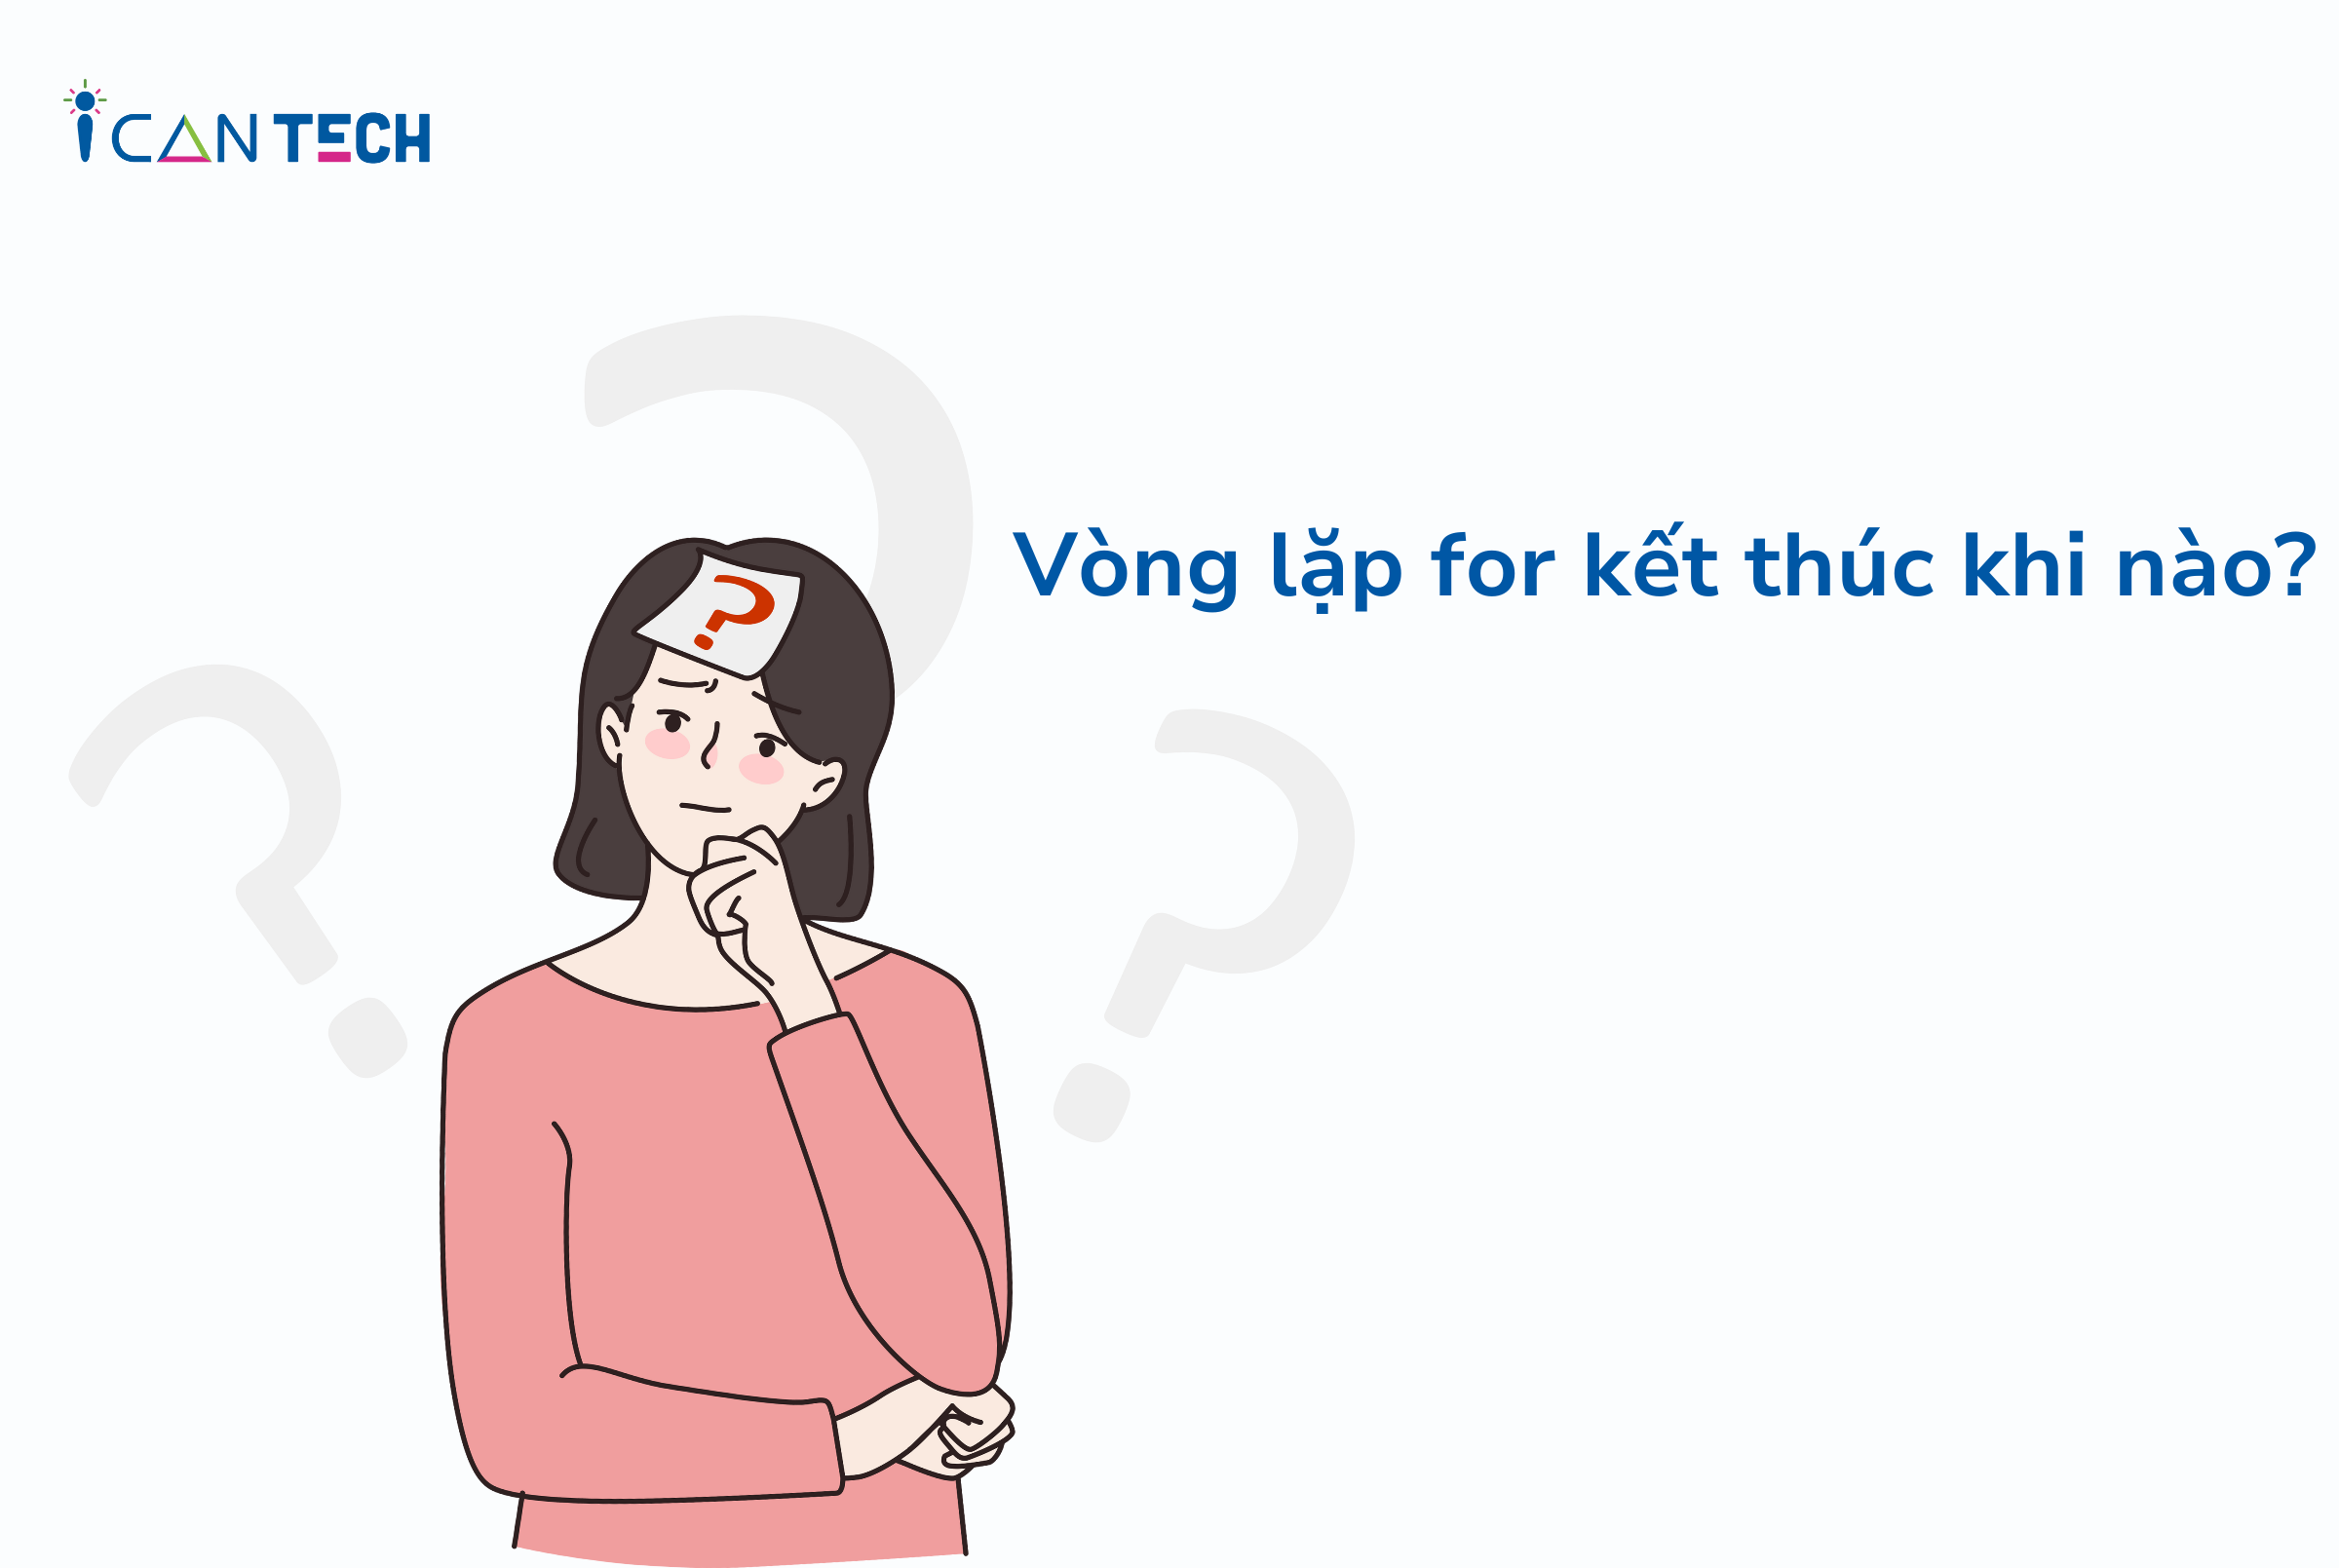 vong-lap-for-ket-thuc-khi-nao